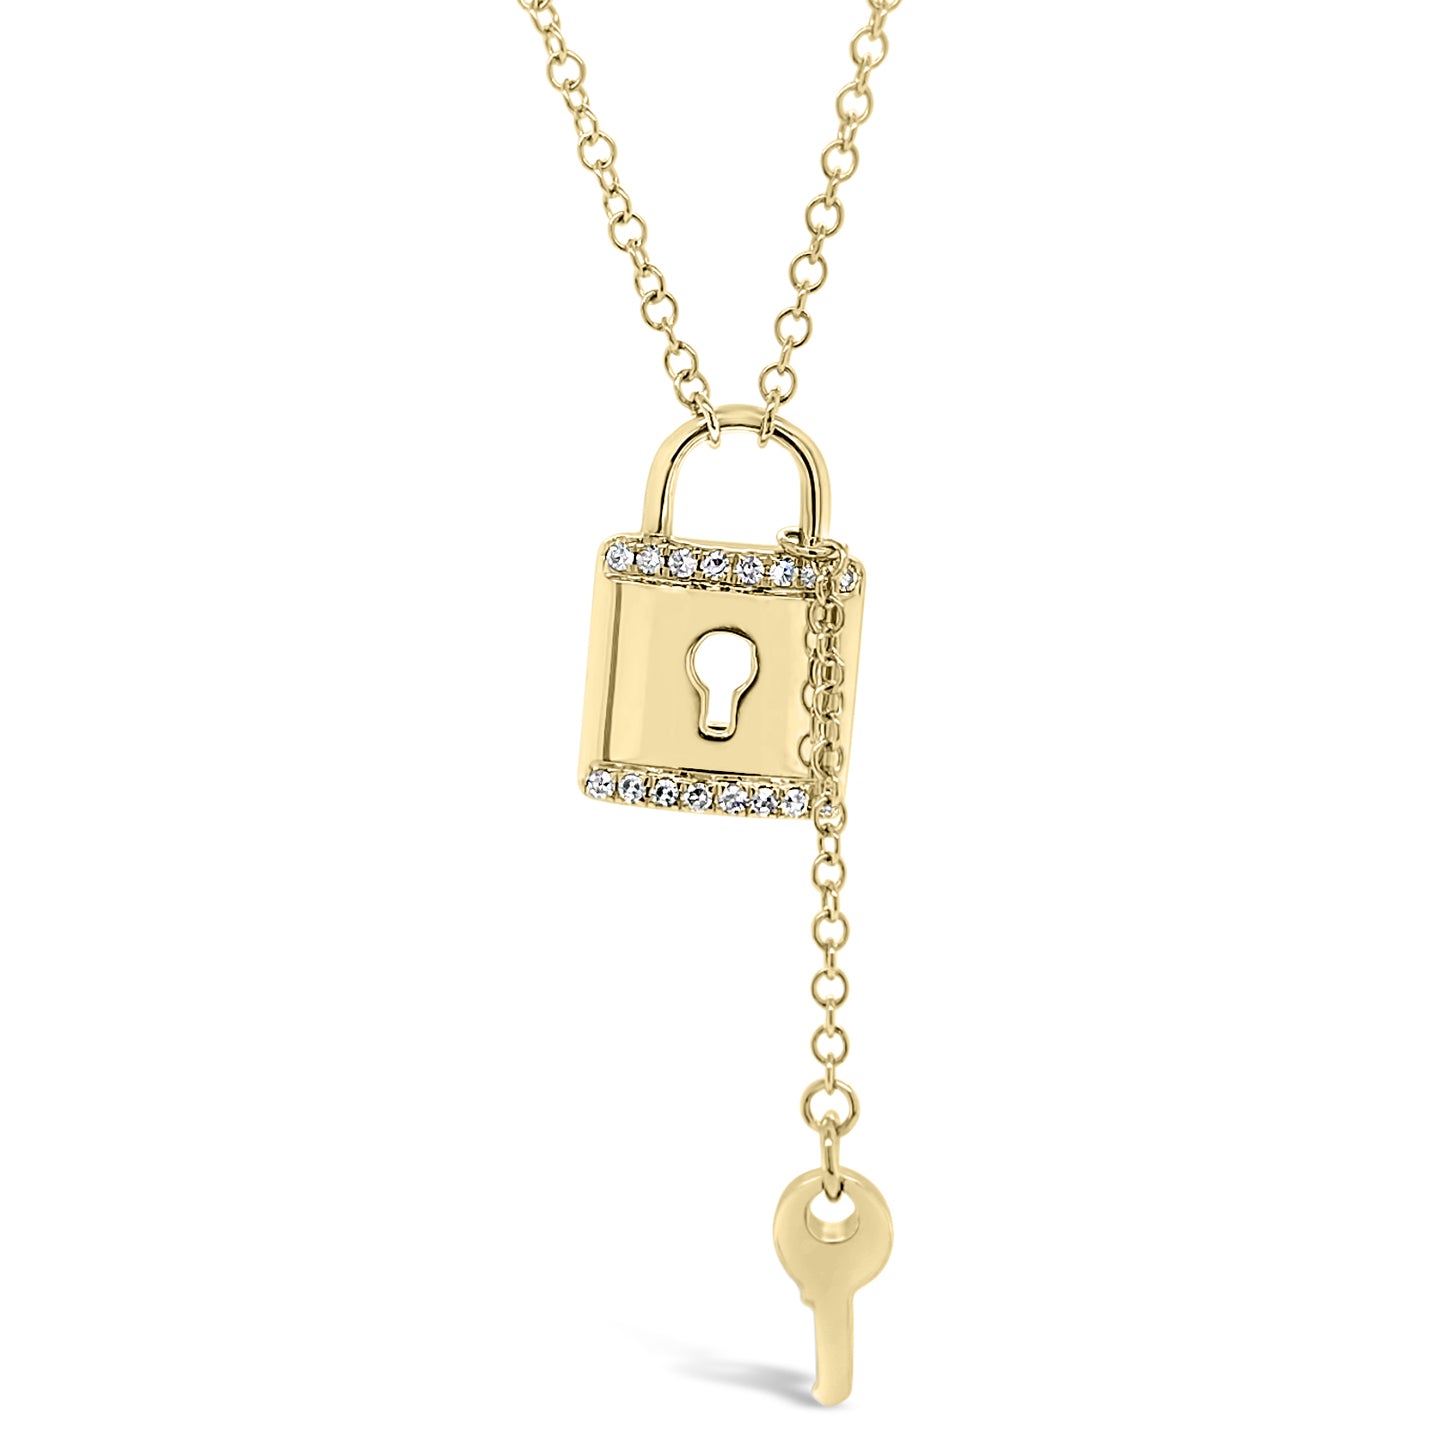 14K Two-Tone Heart Lock and Key Necklace